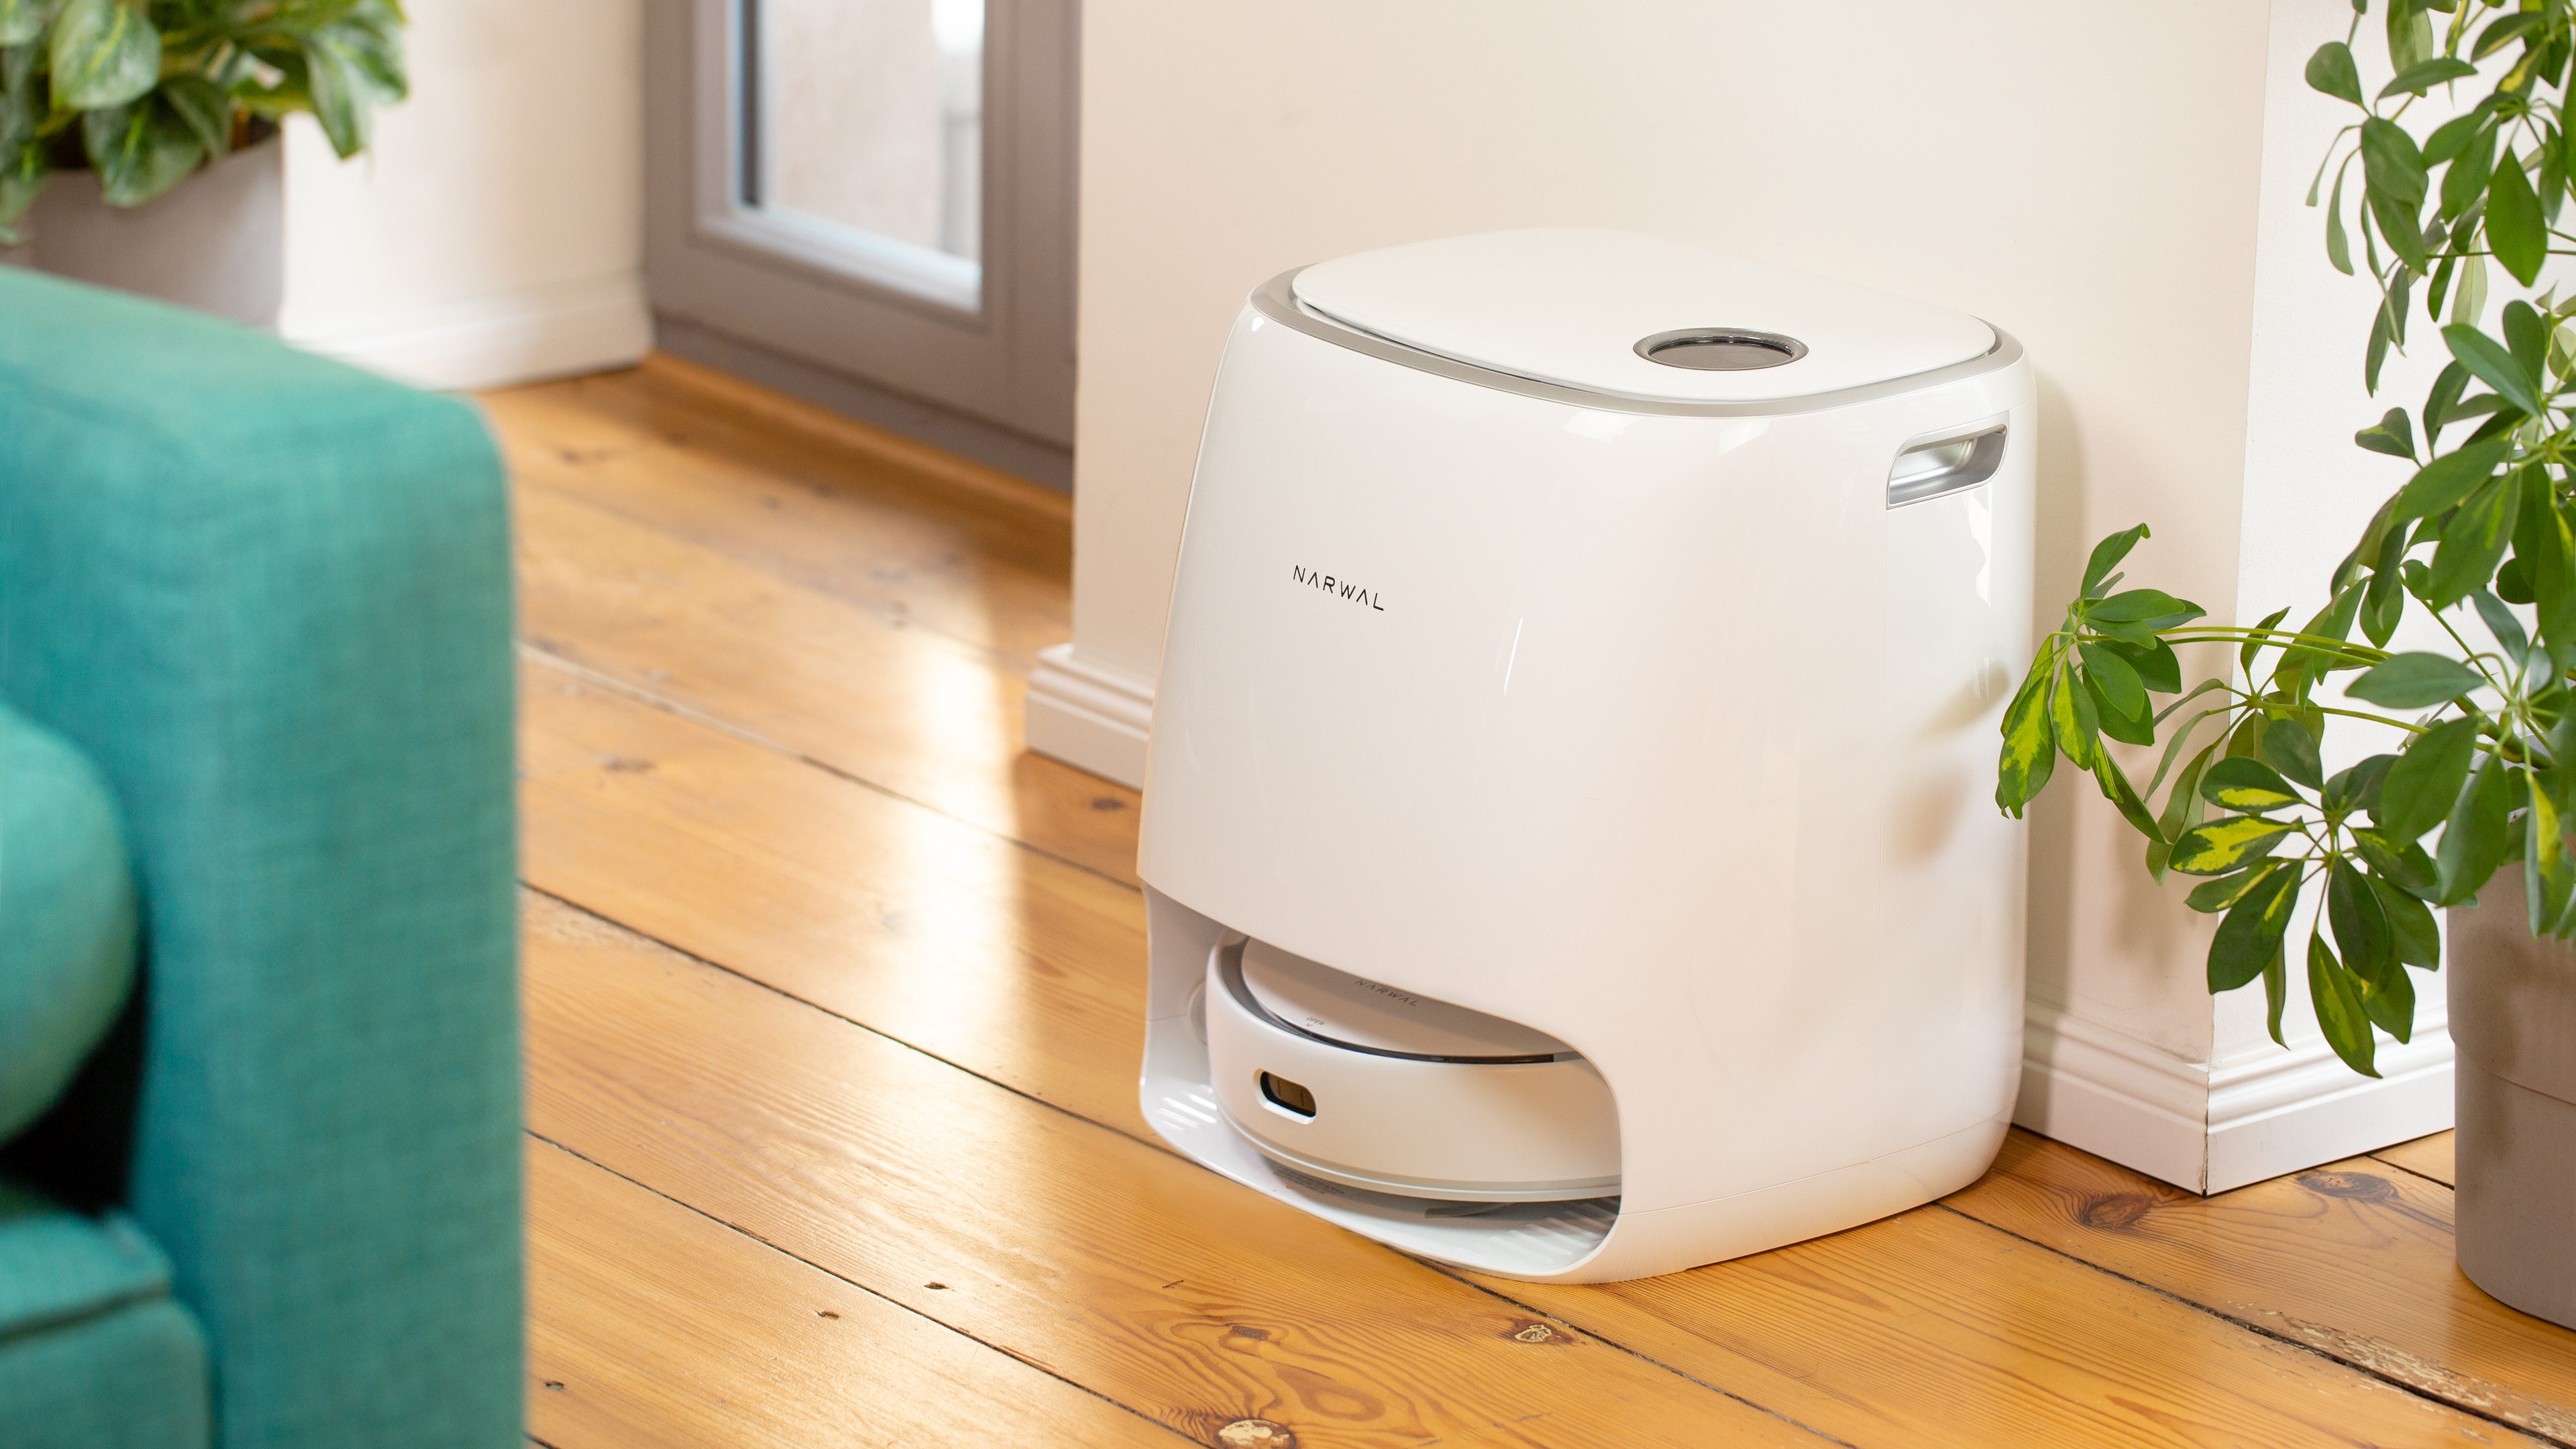 Narwal Freo review: a meticulous robot vacuum and mop